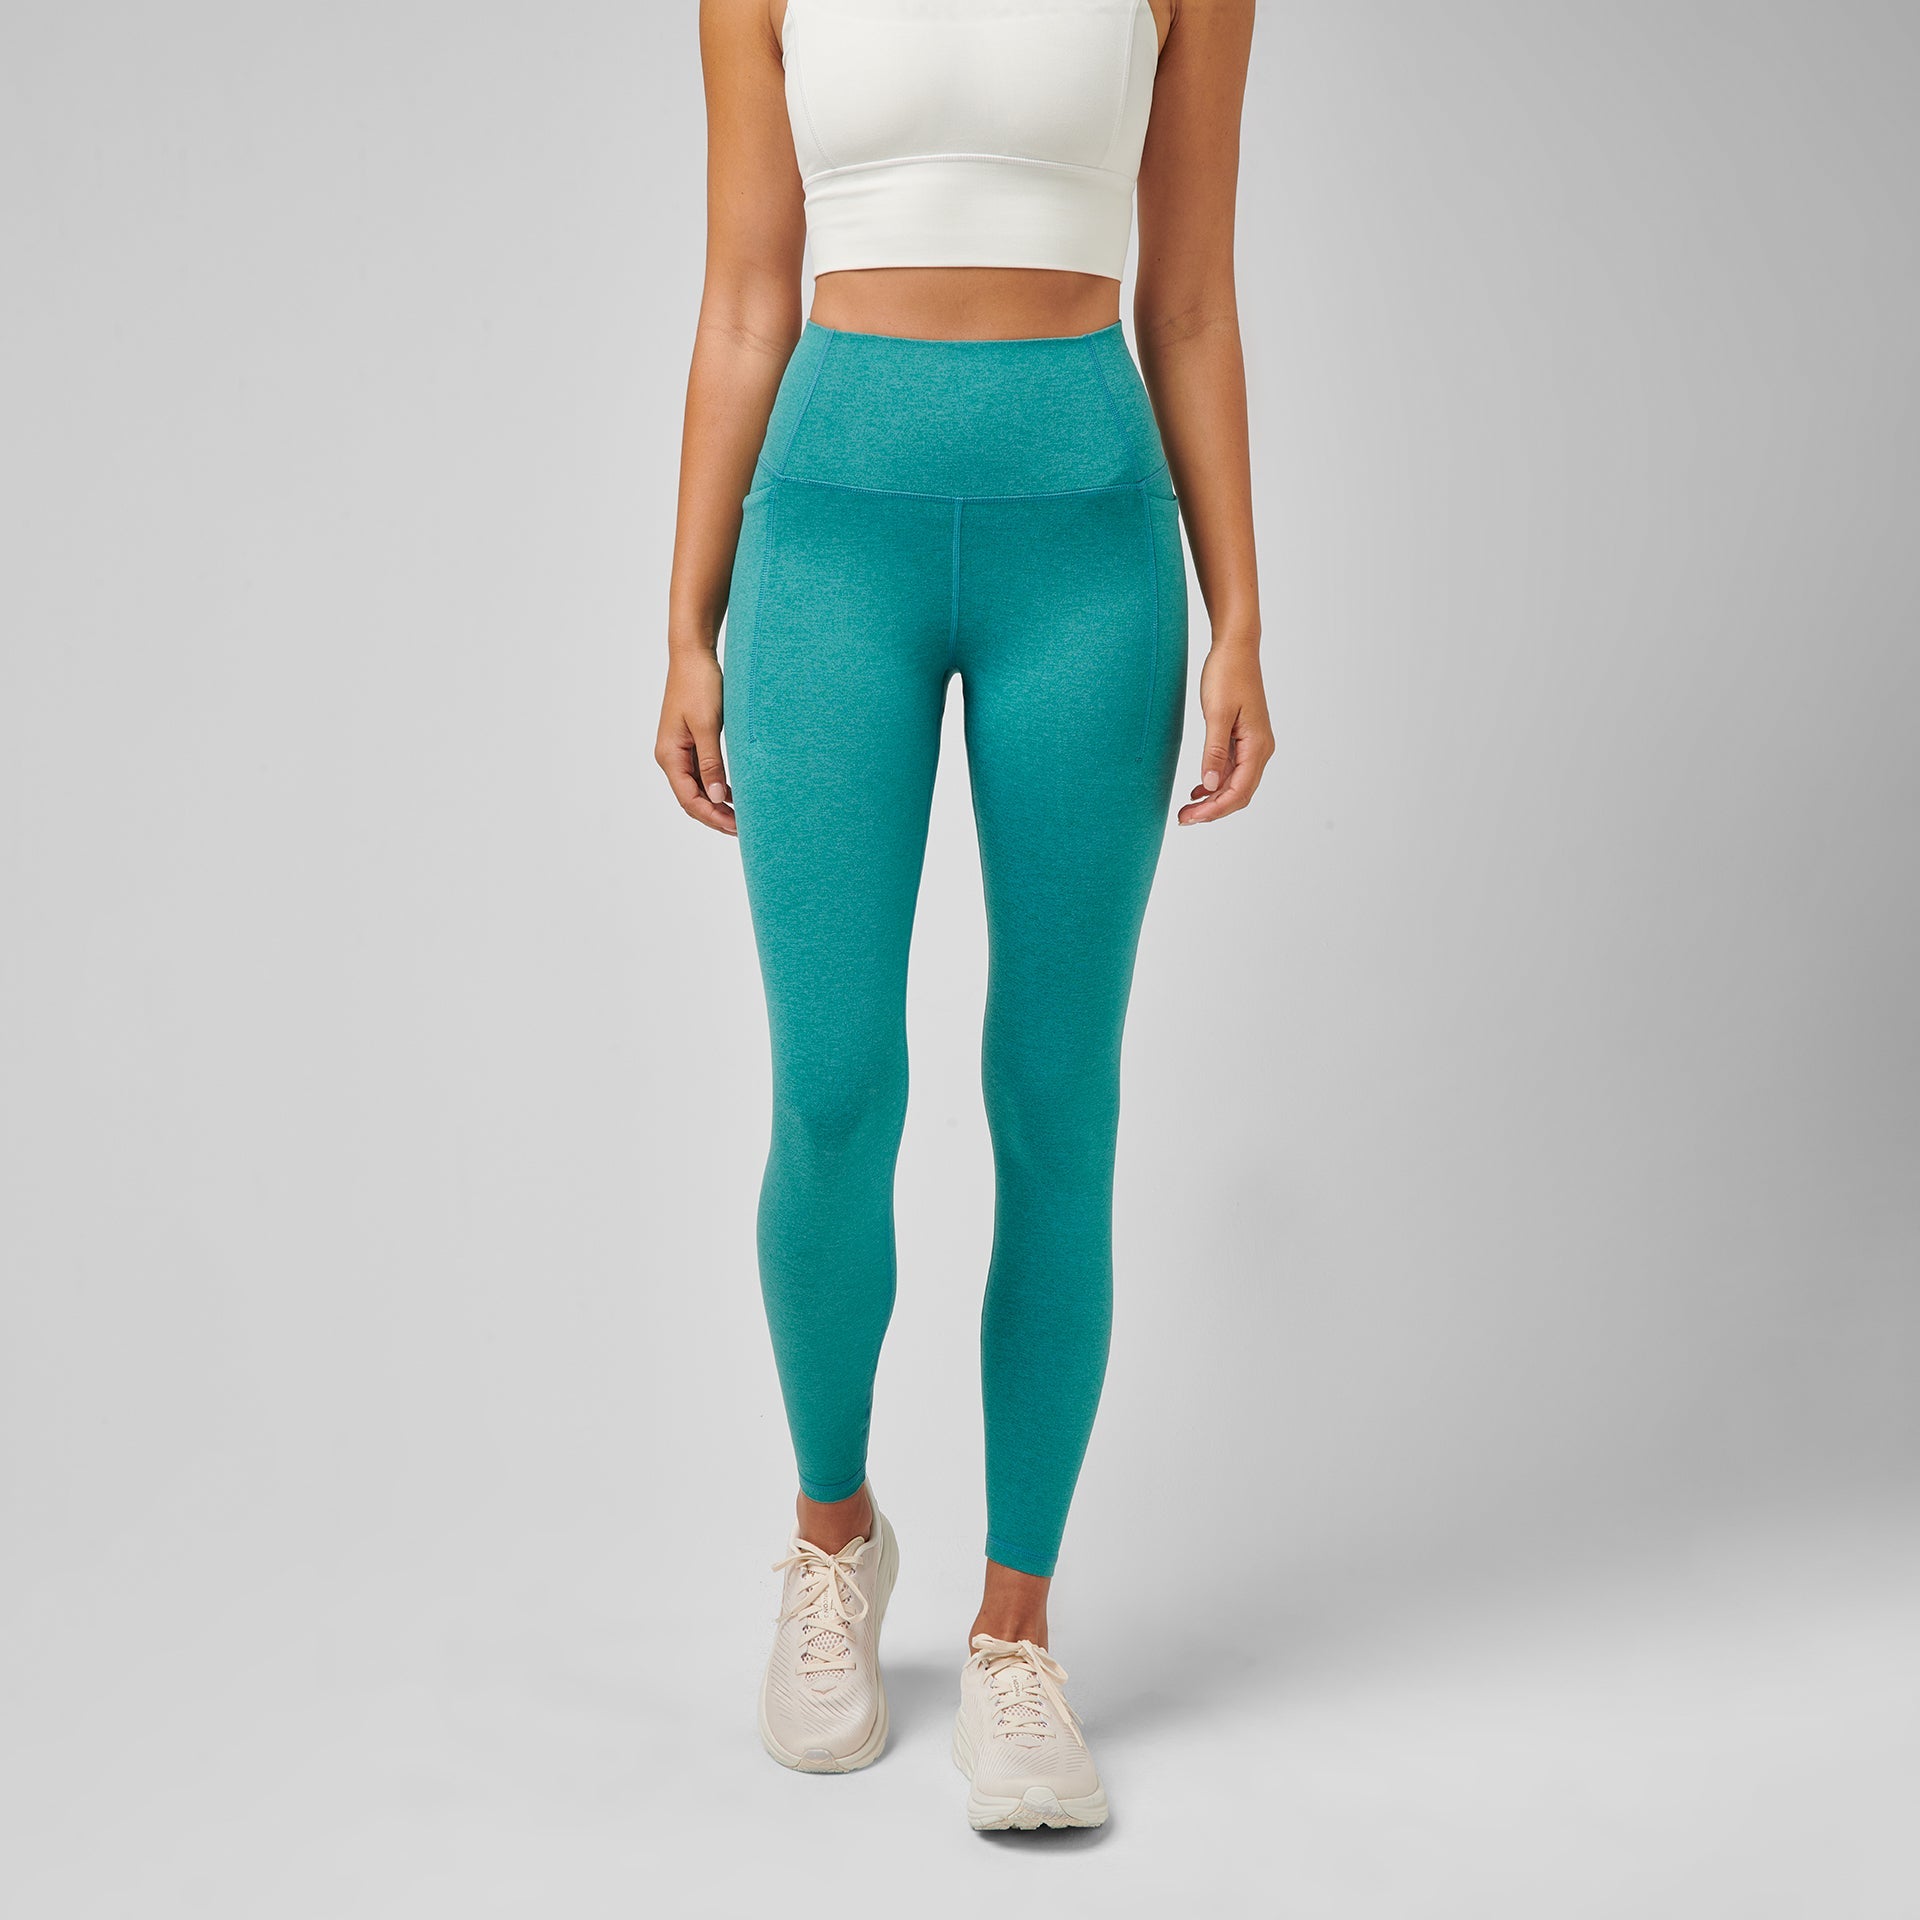 High Waisted Running Leggings That Stay Up Late  International Society of  Precision Agriculture